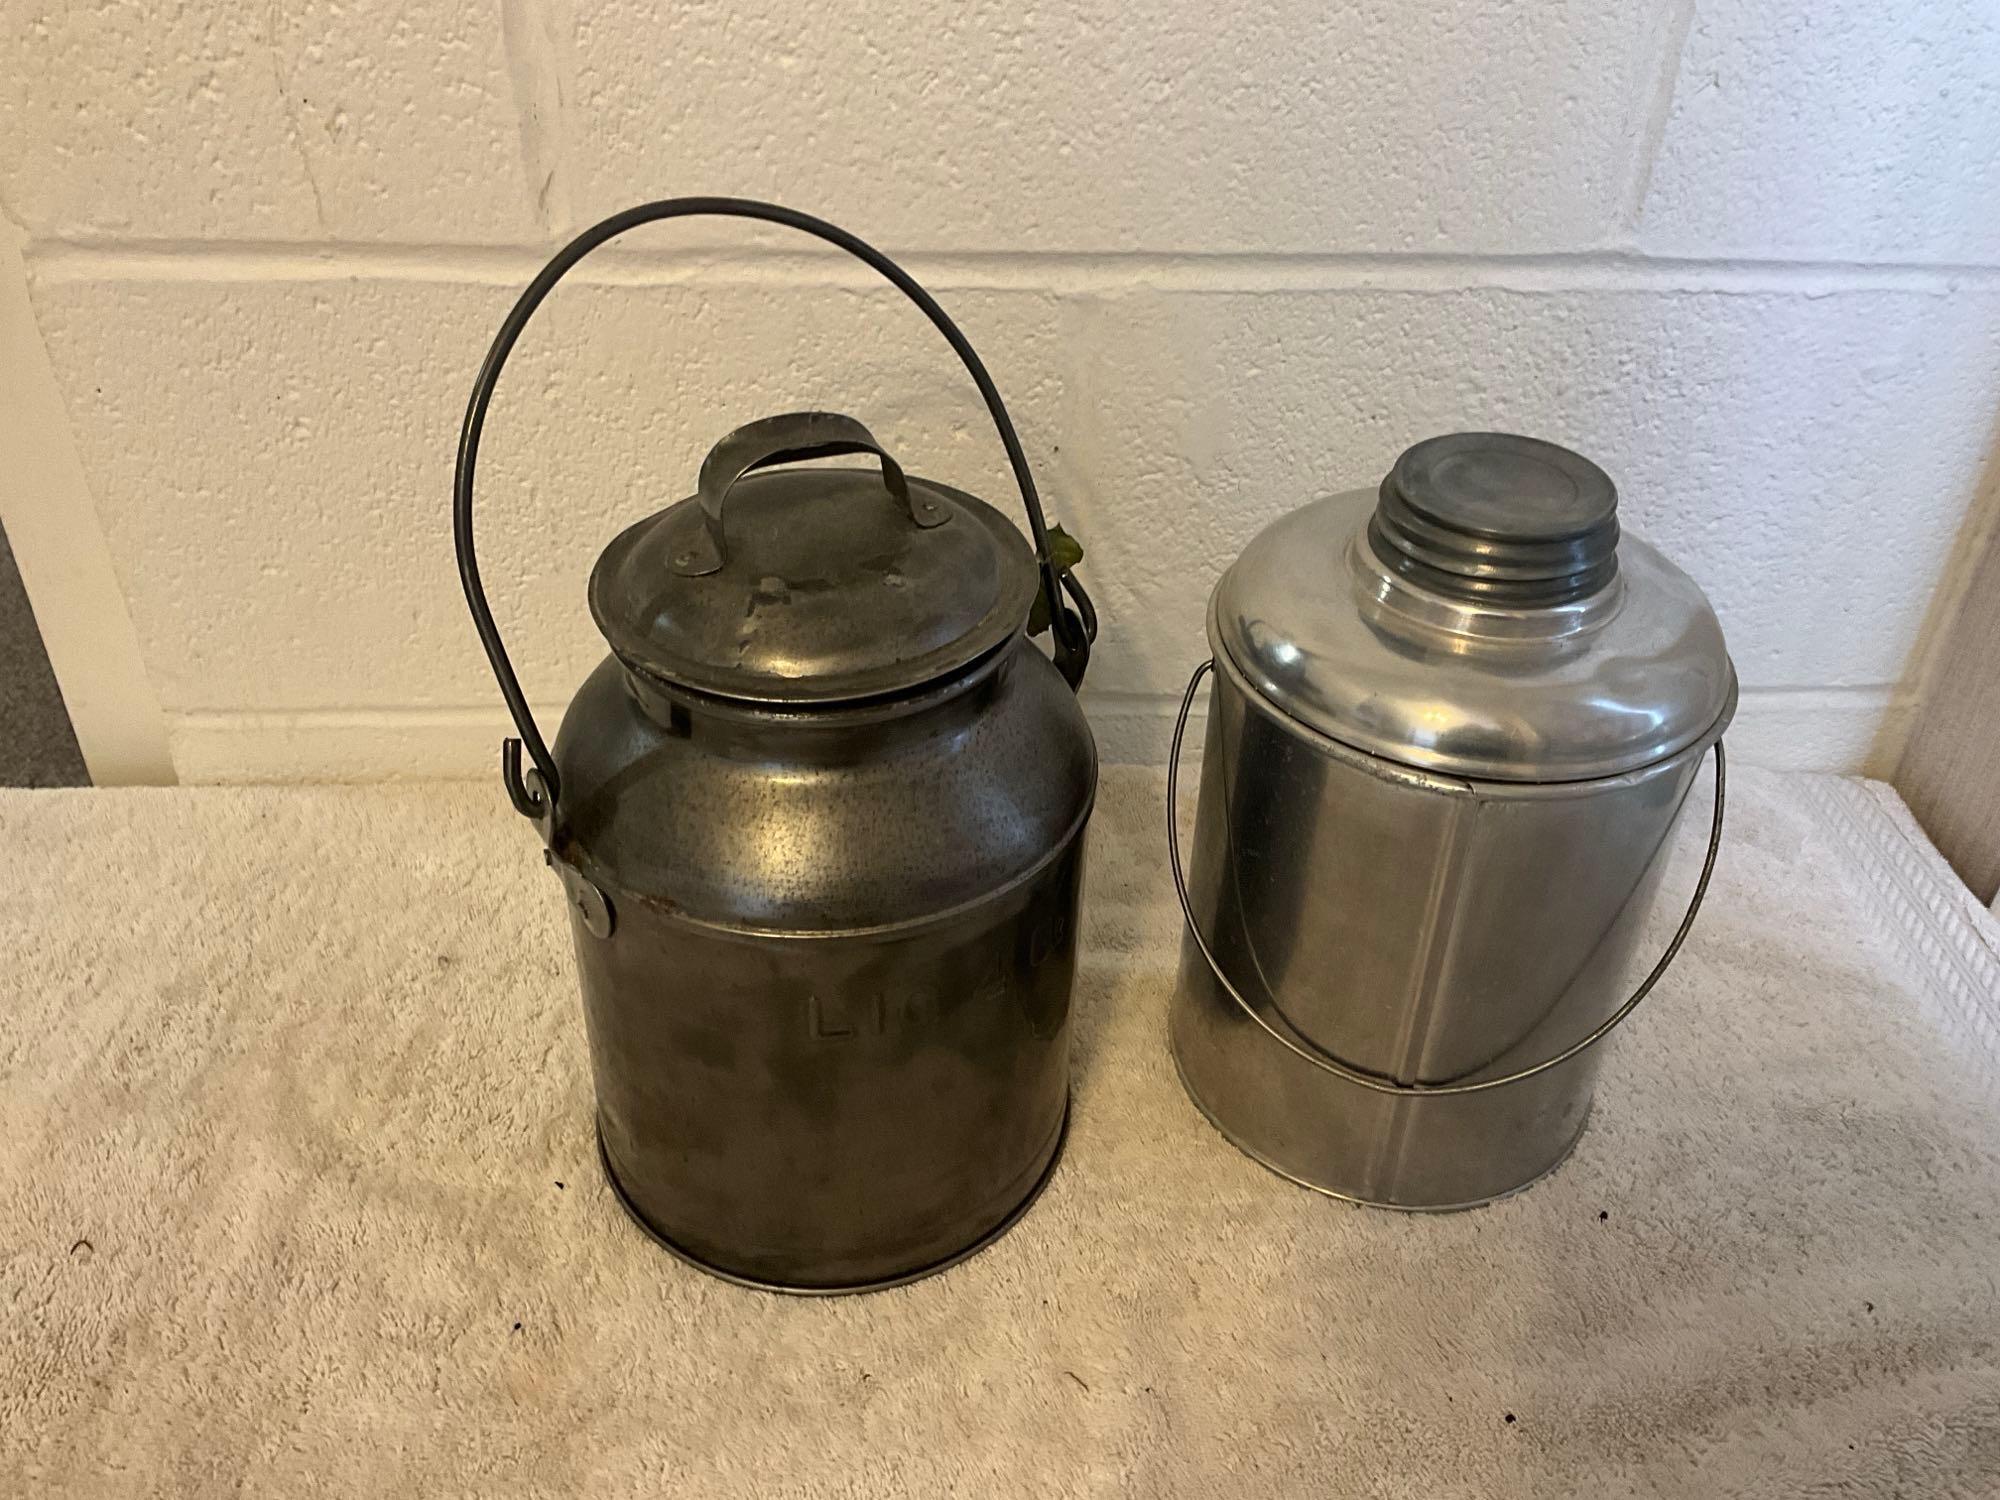 4 qt. cream can & Faris insulated metal thermos jug